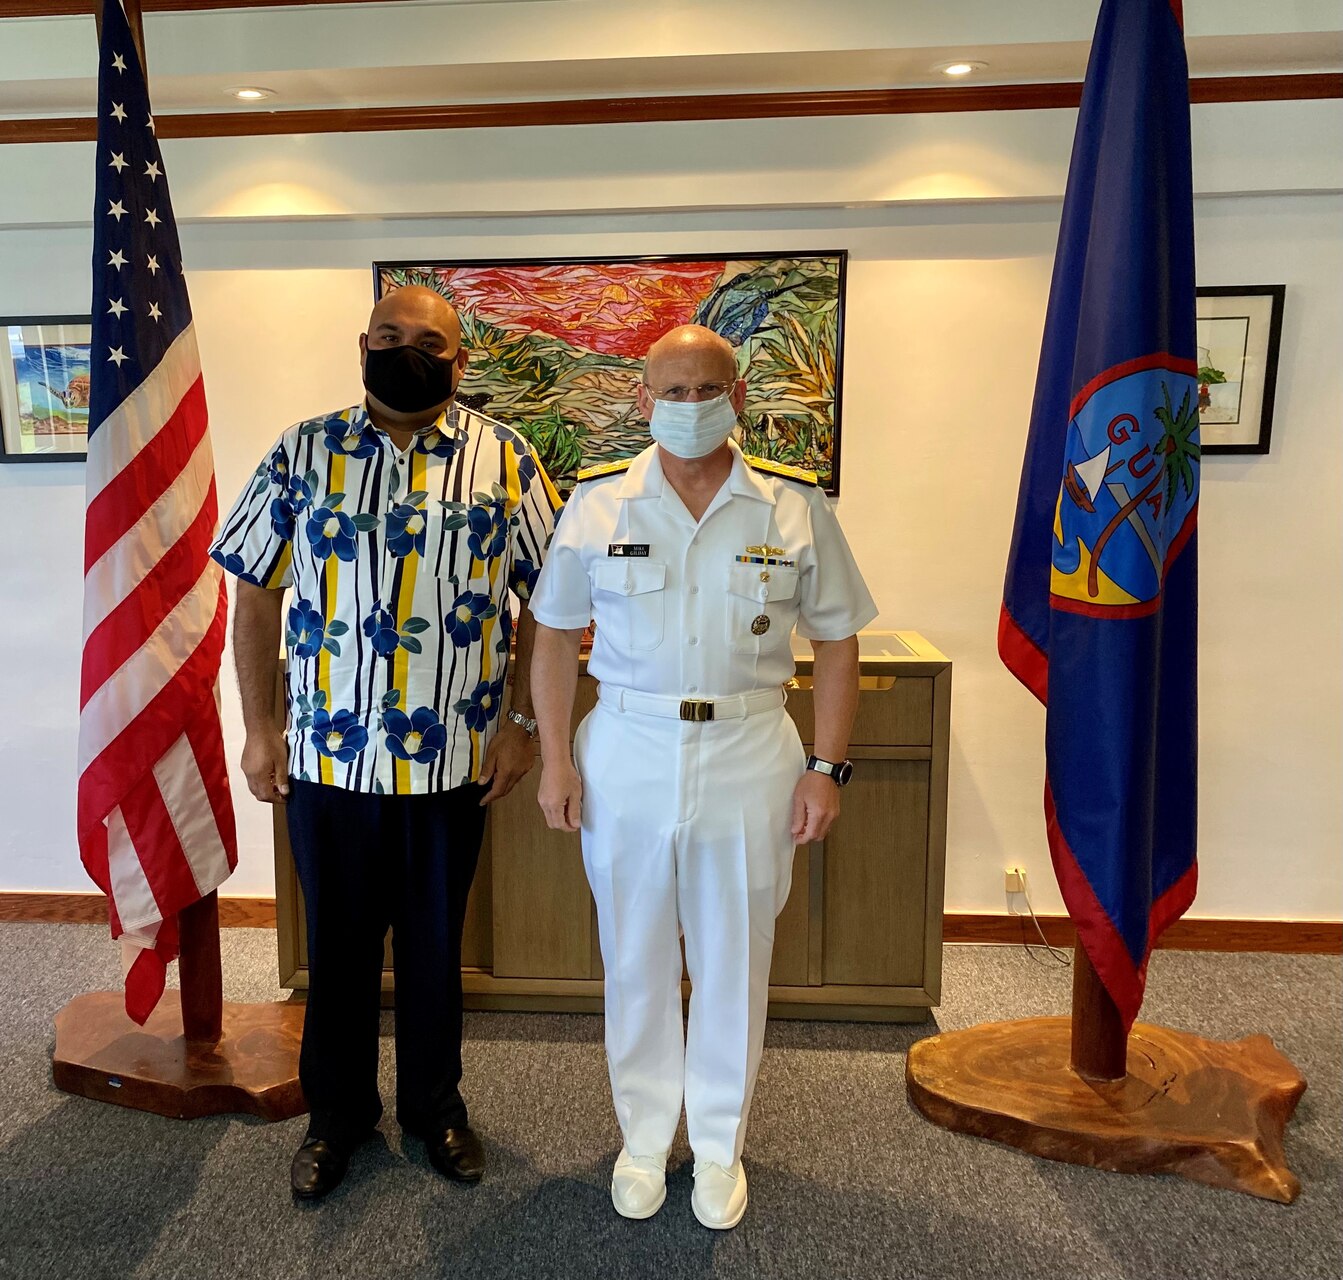 CNO Gilday and Acting Guam Governor pose for a photo in front of Guam and US flags.